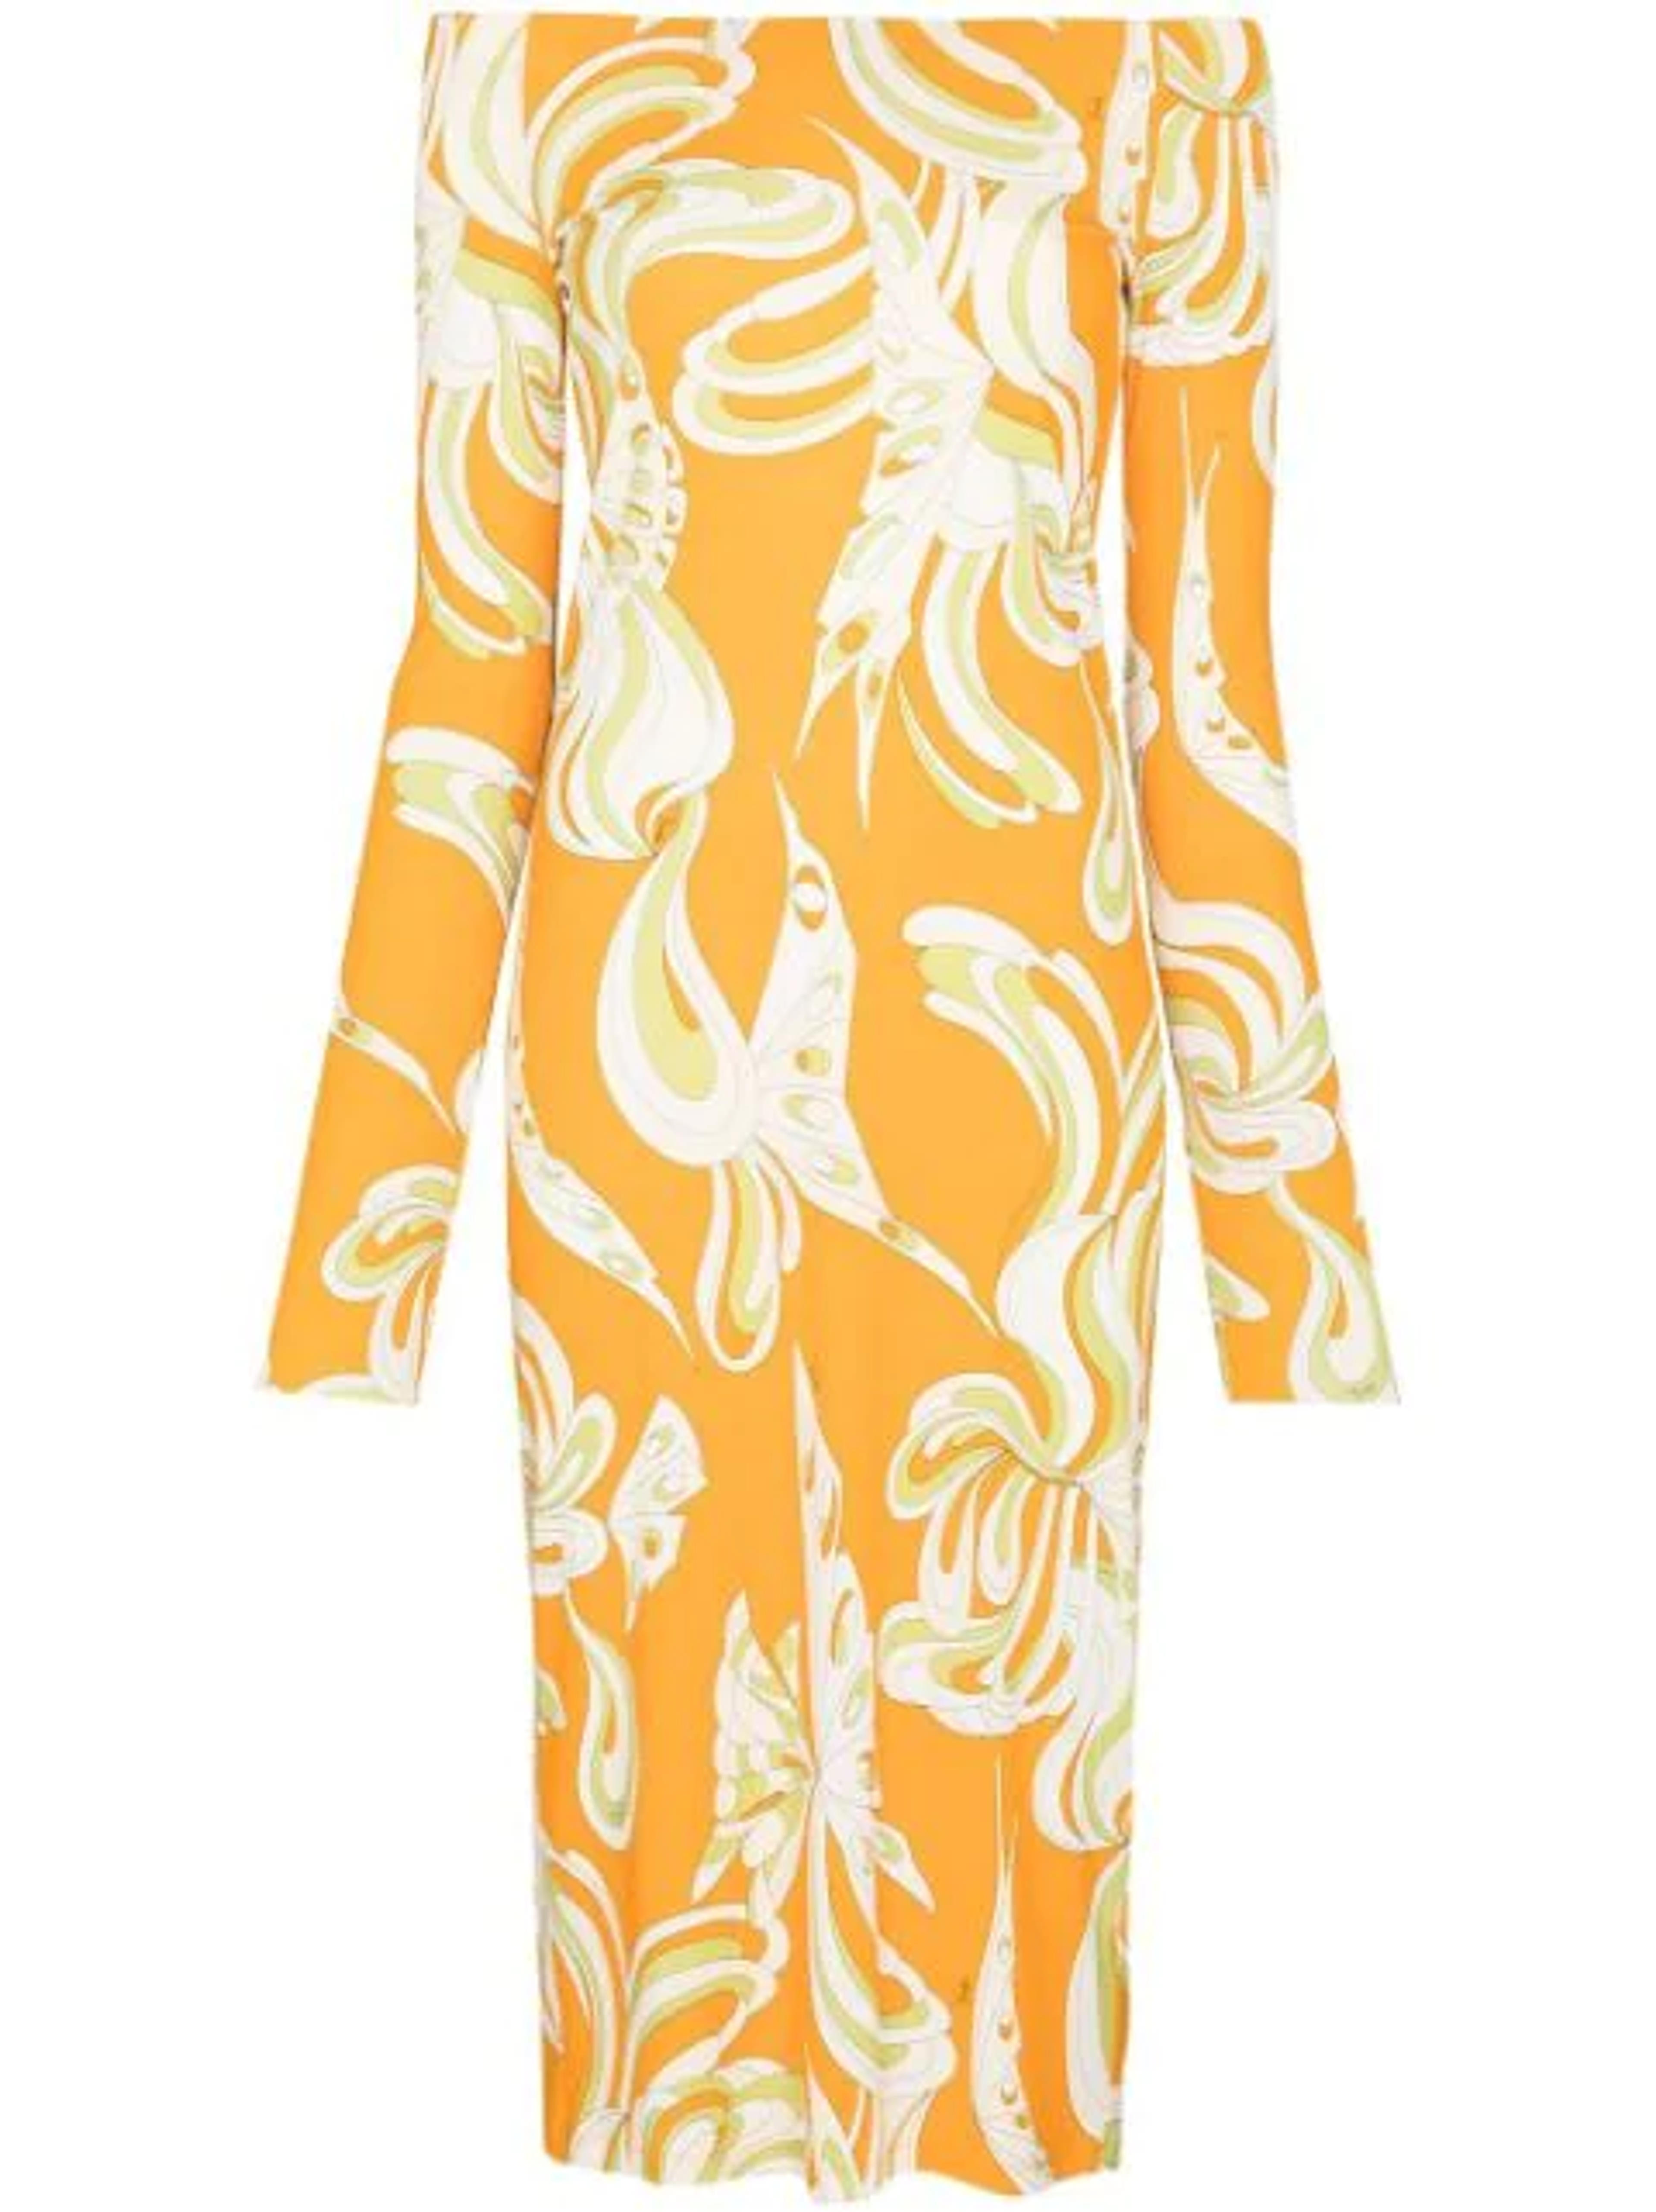 Shop Emilio Pucci Farfalle-print fitted dress with Express Delivery - FARFETCH